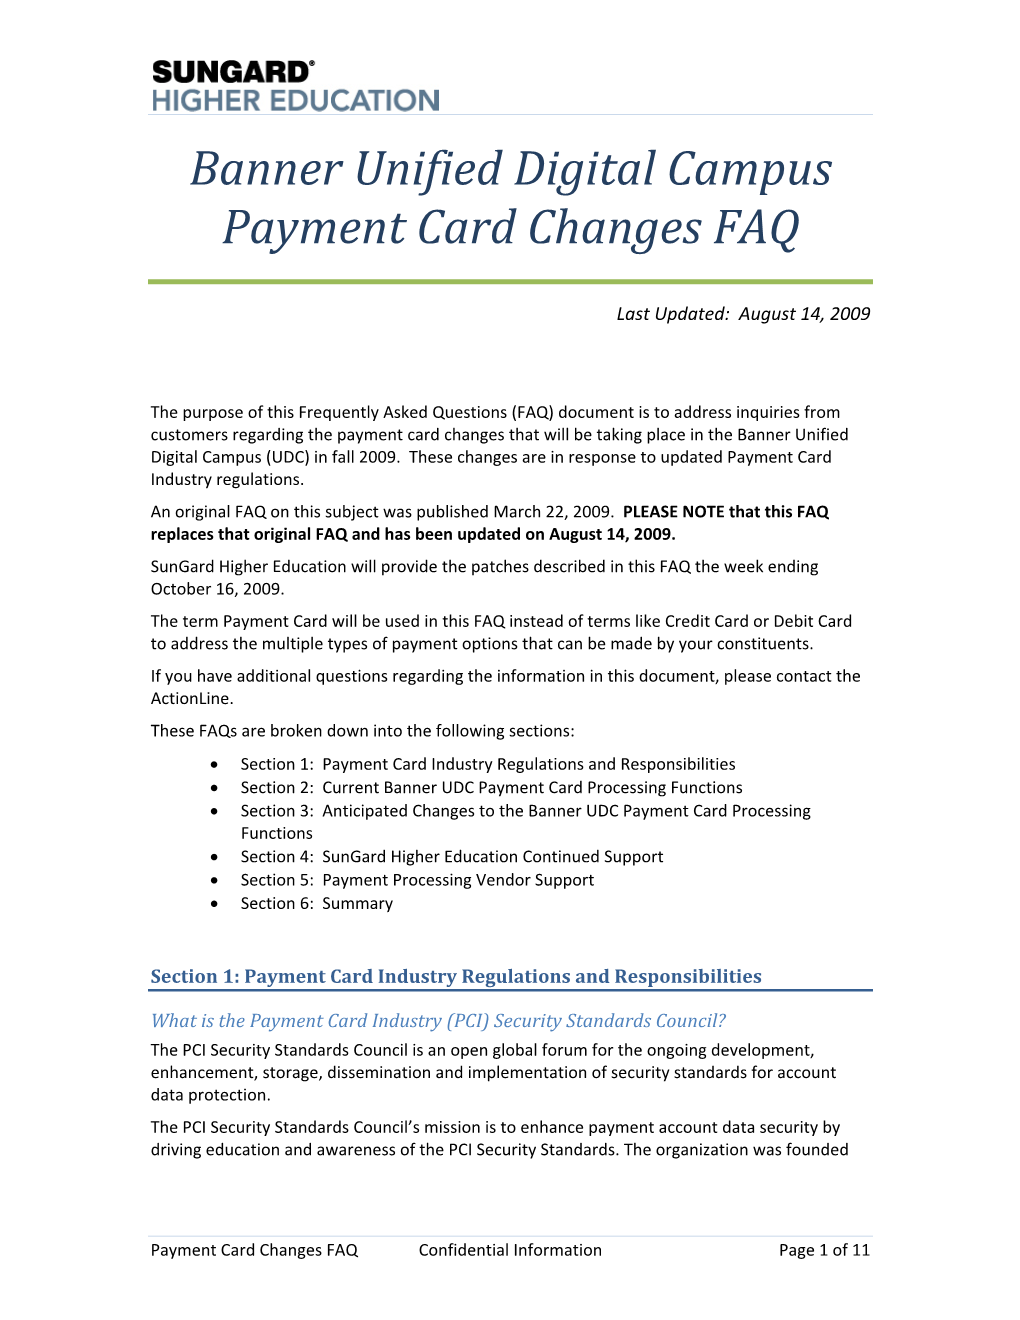 Banner Unified Digital Campus Payment Card Changes FAQ